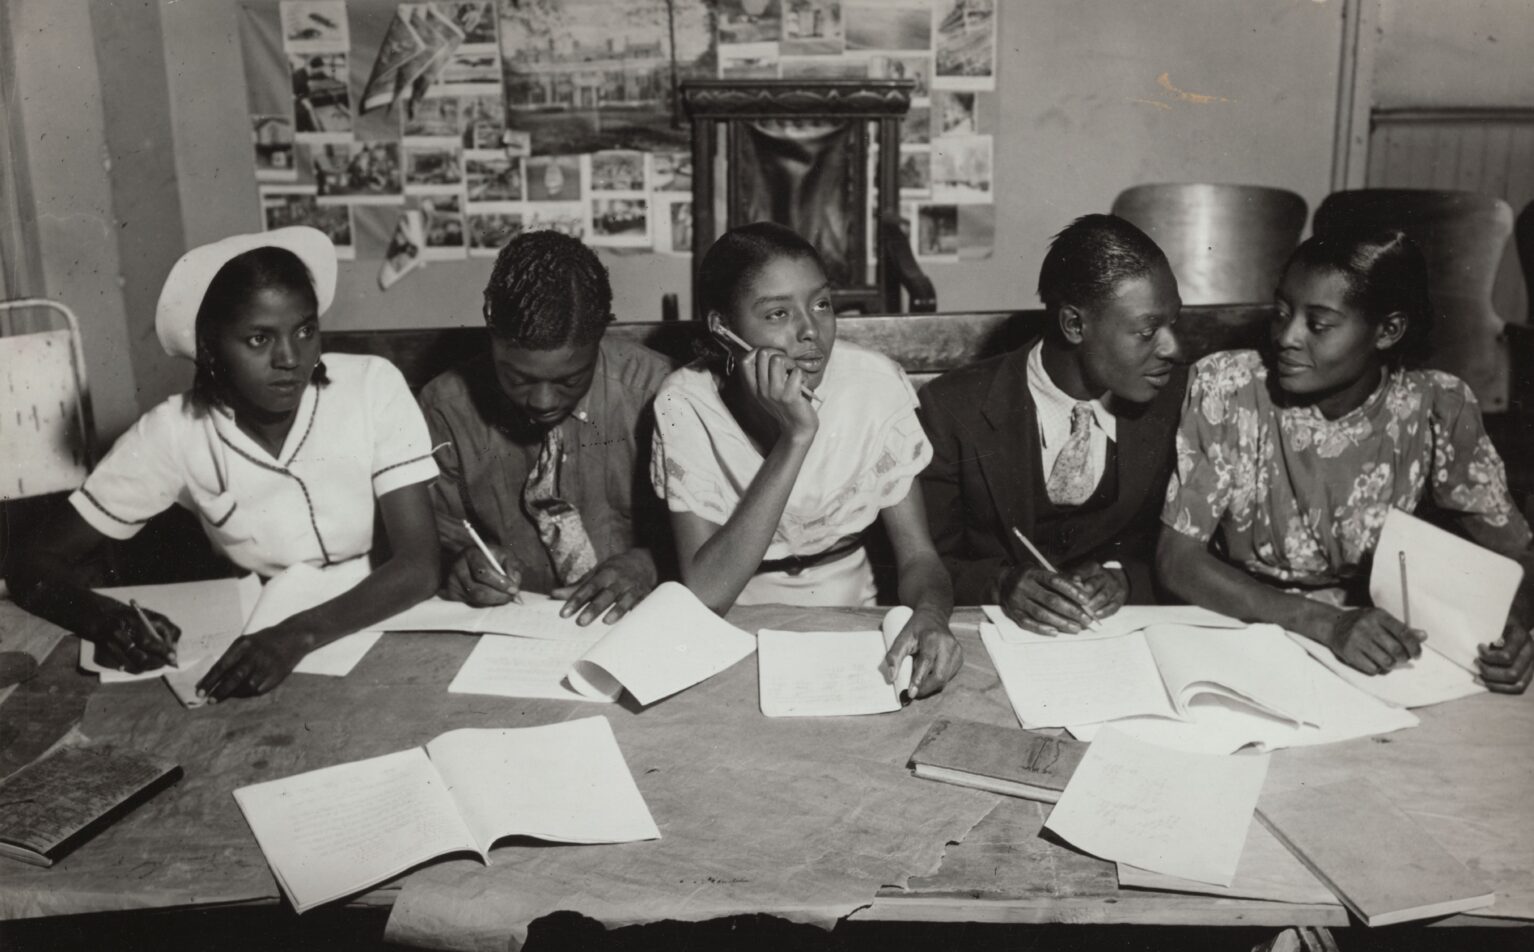 "Students writing, 1935.” Schomburg Center for Research in Black Culture, Photographs and Prints Division, The New York Public Library.